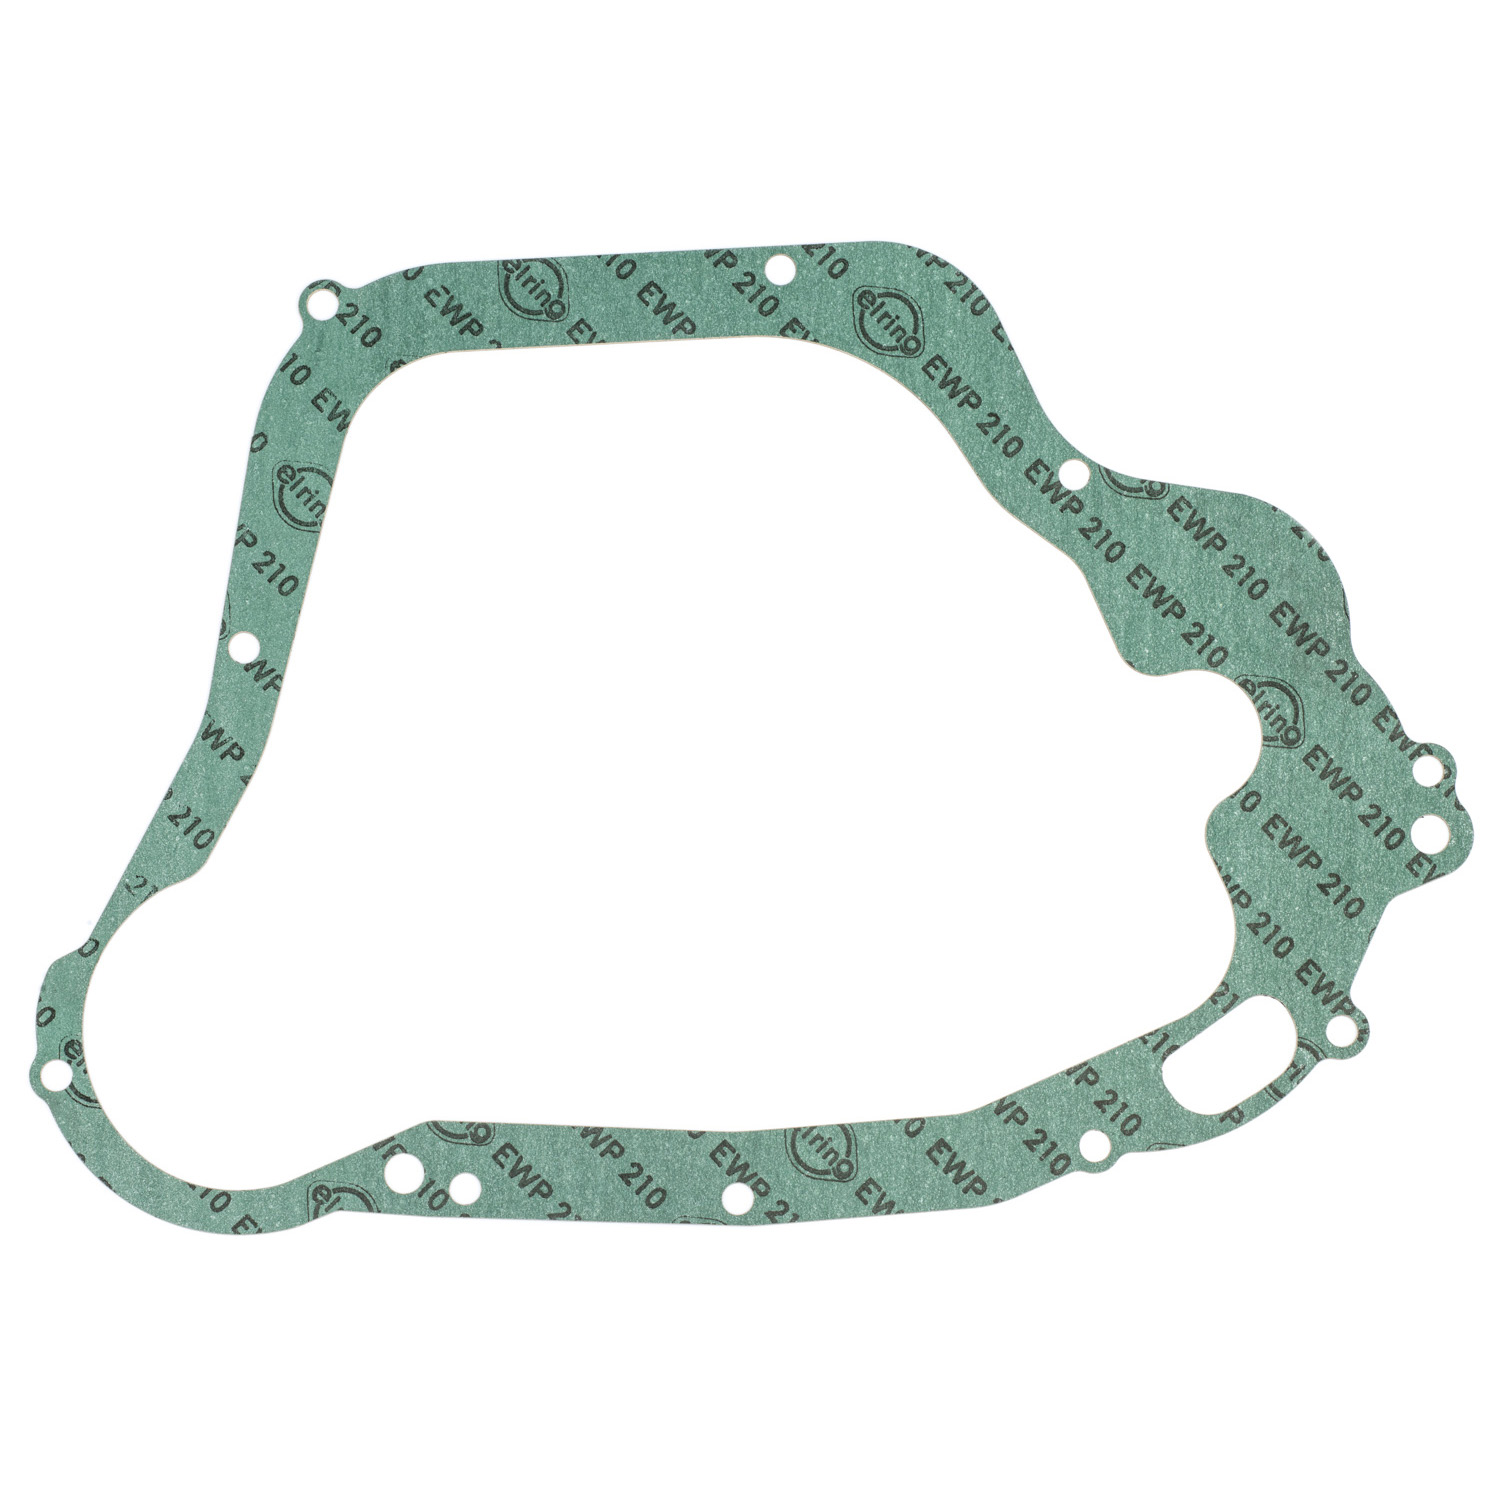 TZR250SPR Clutch Cover Gasket